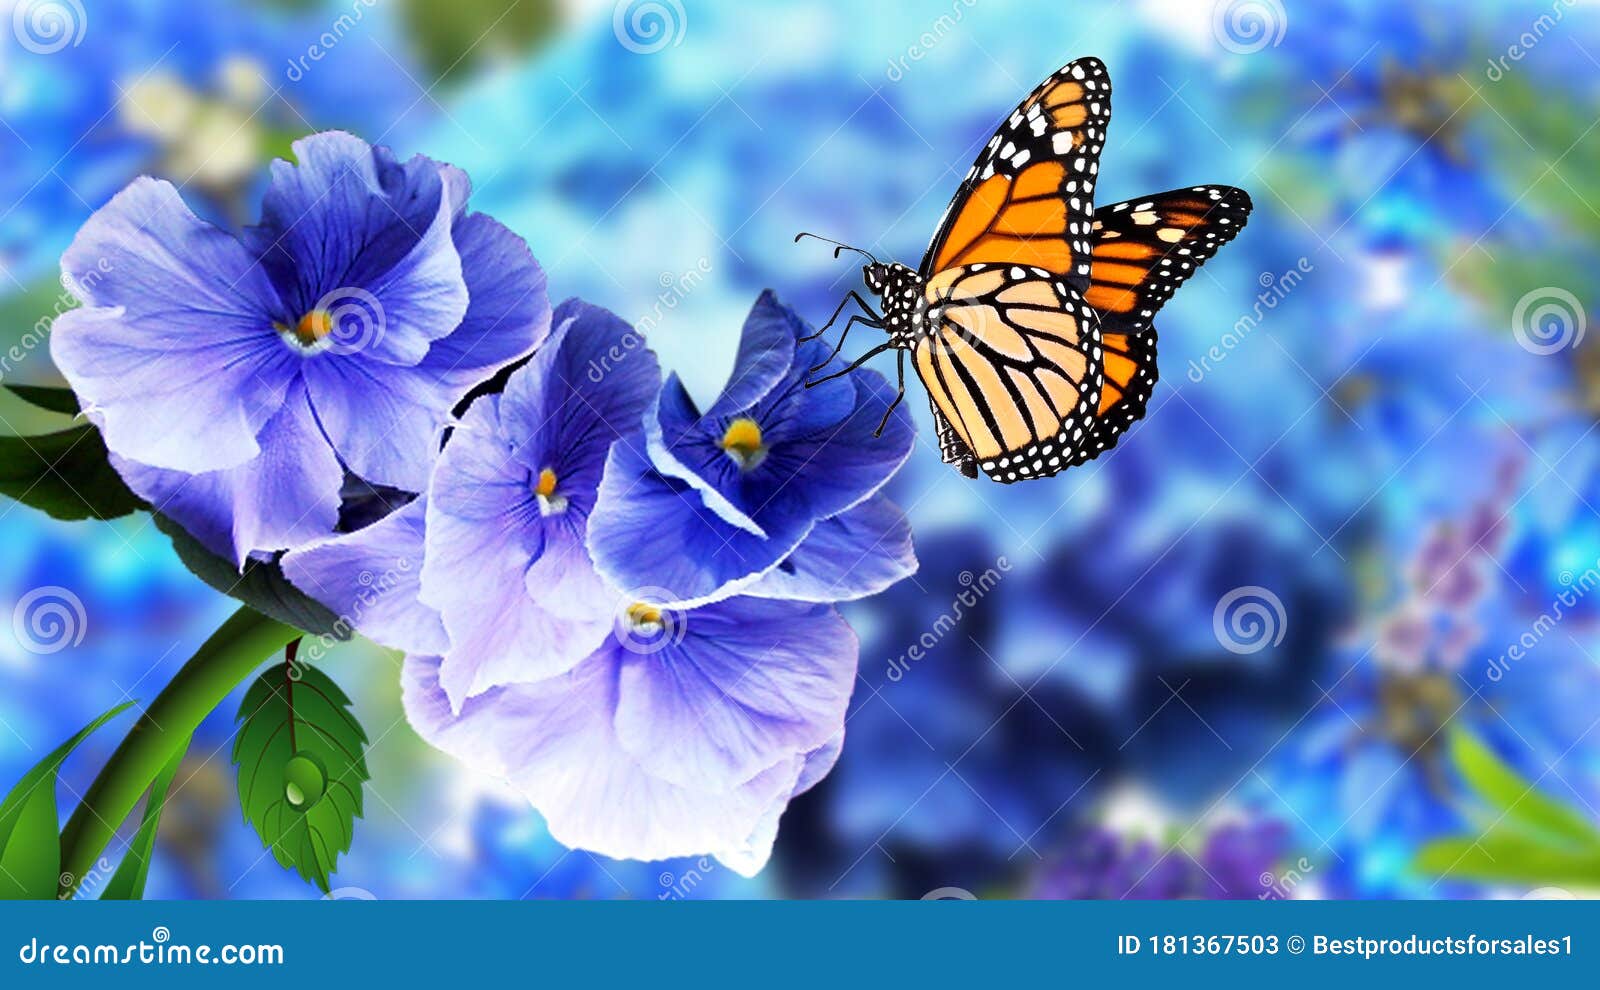 Butterfly on Flowers with Blurry Natural Background. Beautiful Butterfly  Flower Images Stock Image - Image of freshness, petal: 181367503